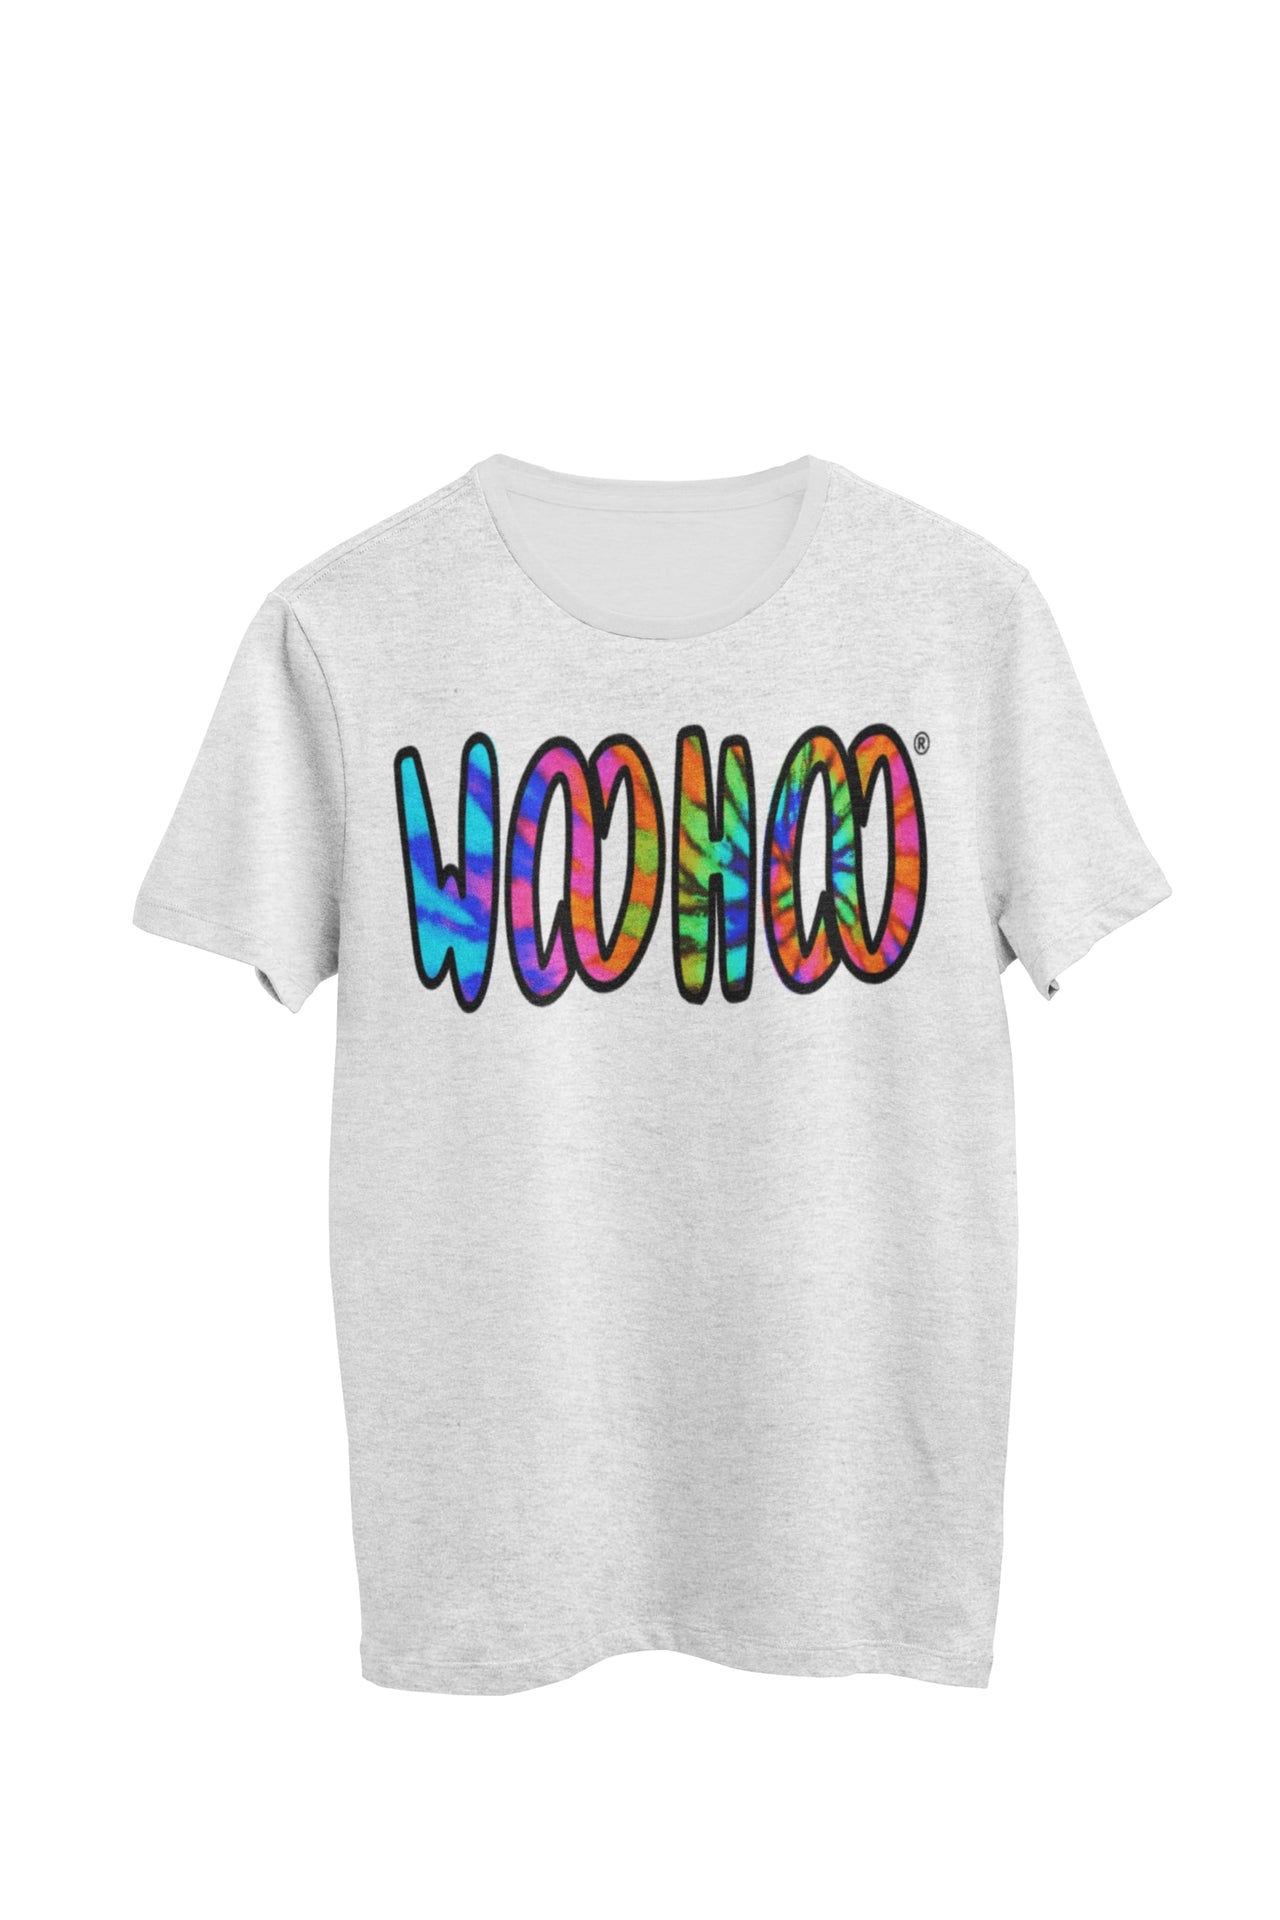 Heather gray unisex t-shirt designed by WooHoo Apparel. The design features a larger 'woohoo' font with tie-dye inside the outline, called Tigerclaw.